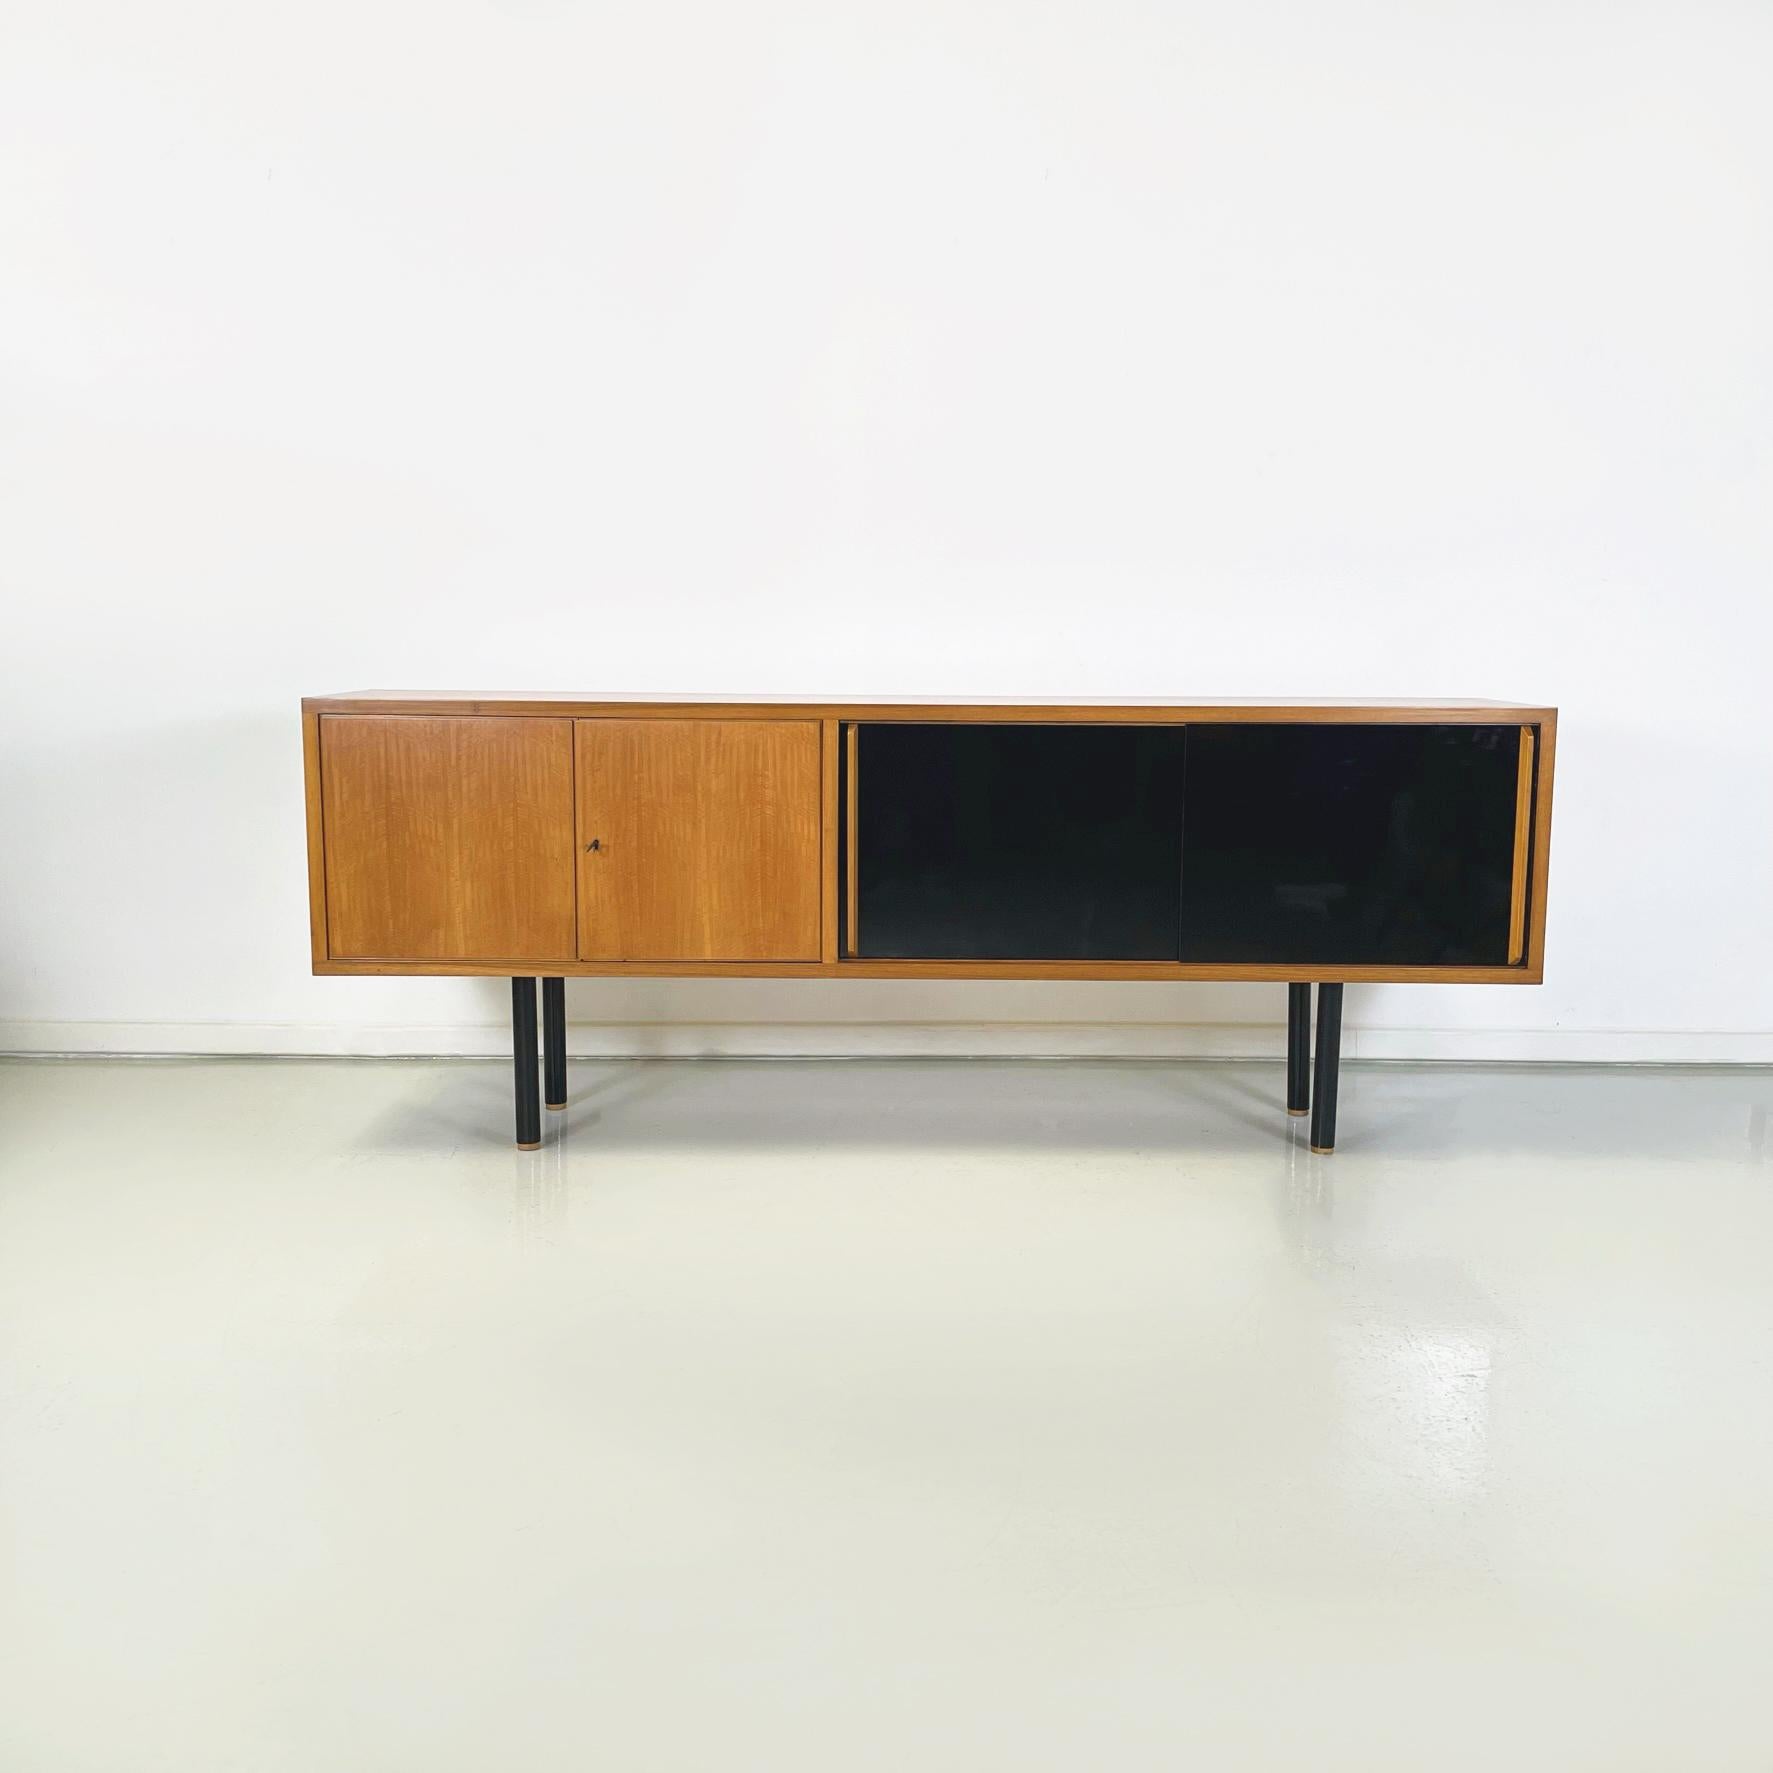 Italian midcentury Rectangular Sideboard in teak and black glossy wood, 1960s
Sideboard with rectangular base in teak and glossy black wood. On one side it has a compartment with a sliding closure with a glossy black front, on the other it has a